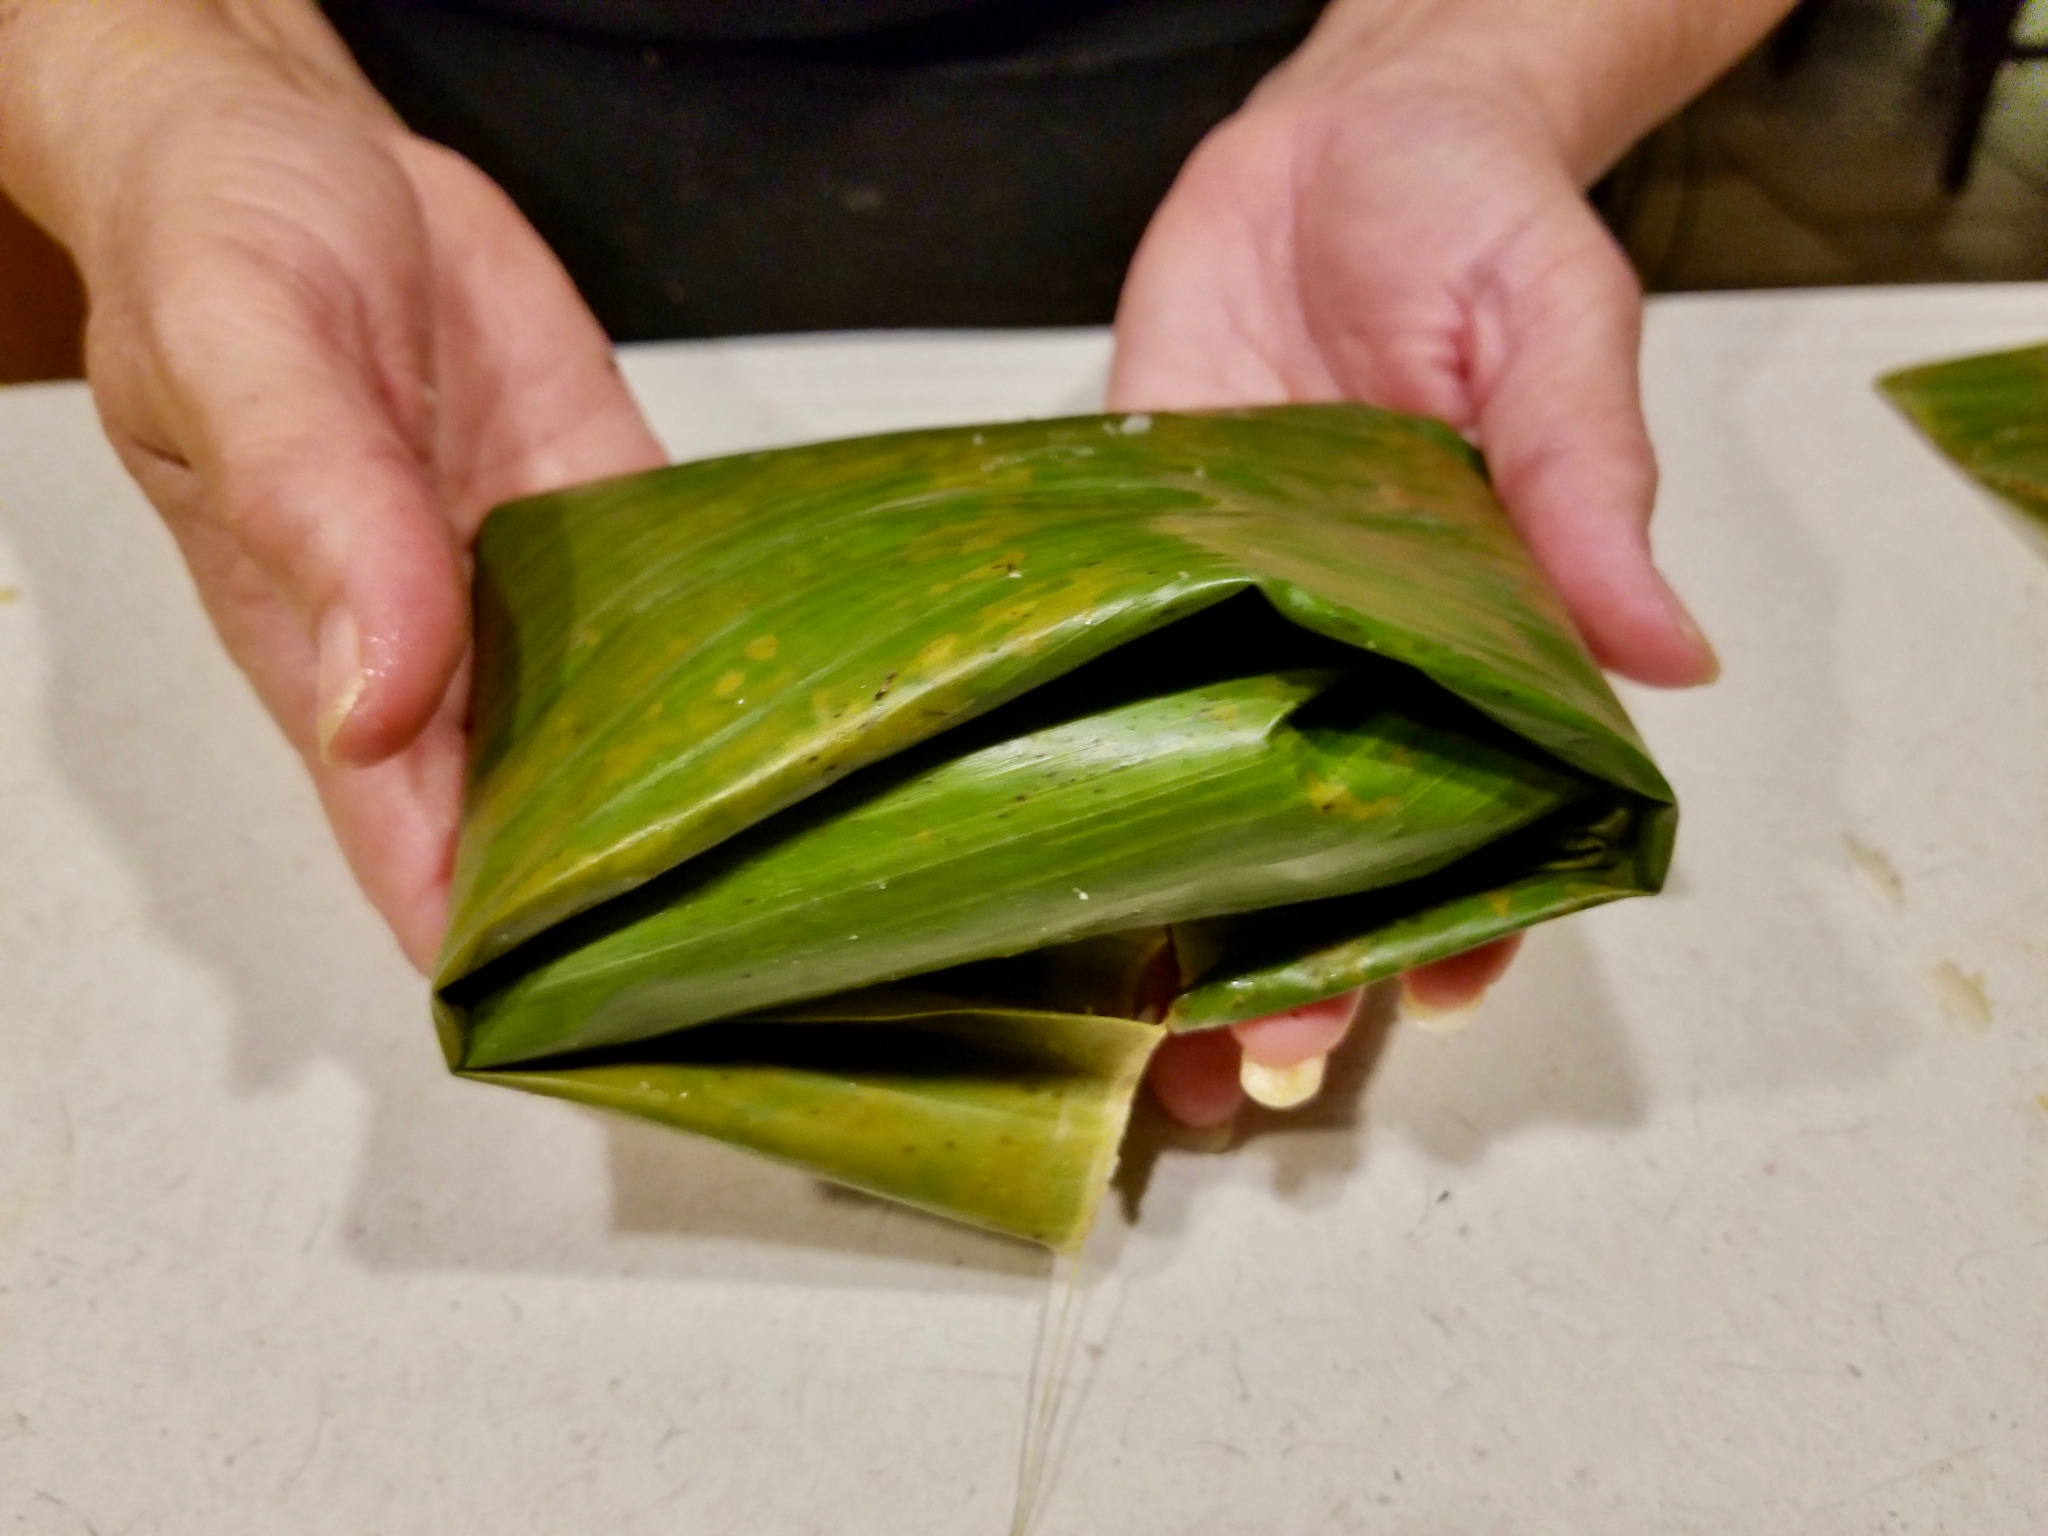 How to fold banana leave tamales